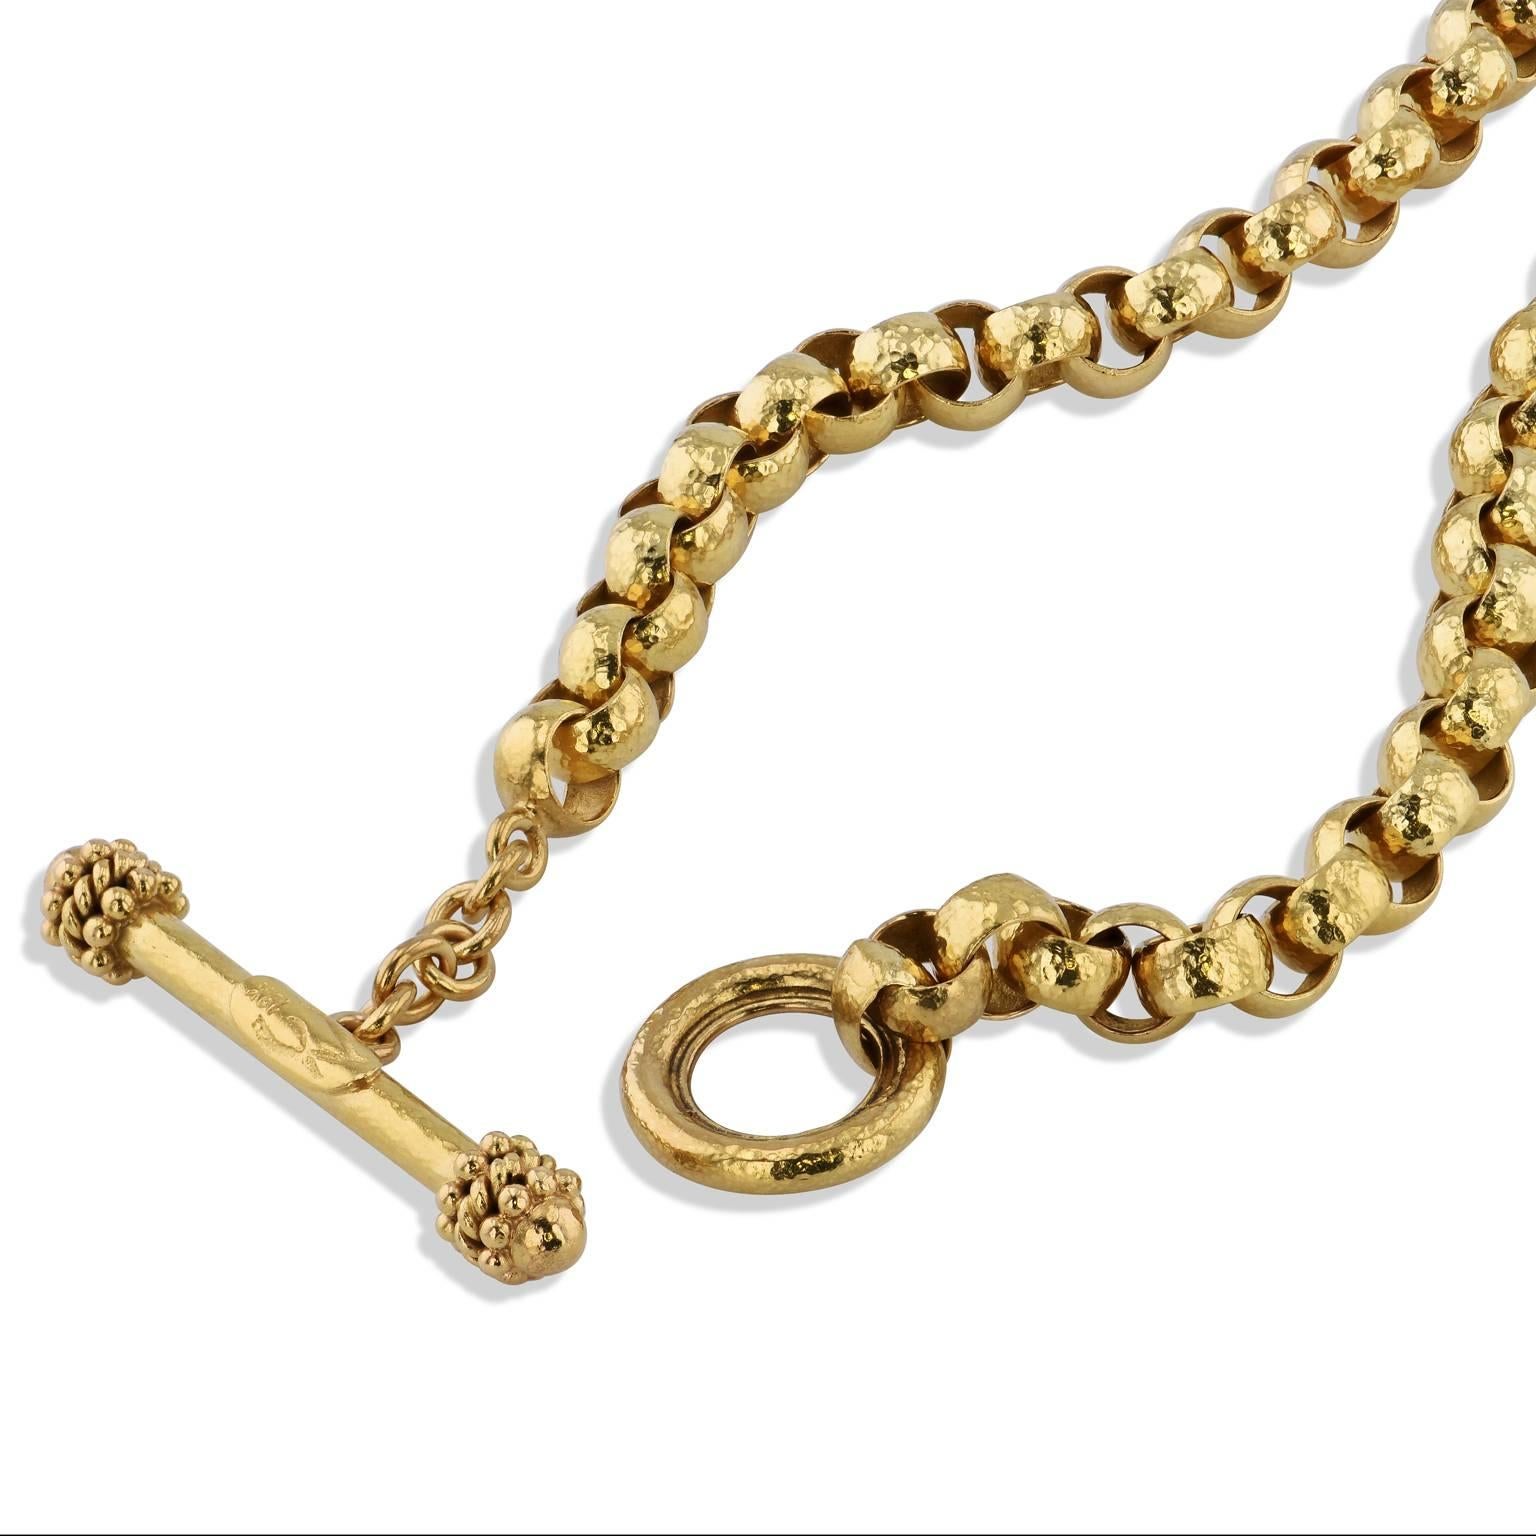 This previously loved 18 karat yellow gold Elizabeth Locke toggle necklace featuring Venetian links is versatile and chic. Make it your new favorite accessory.